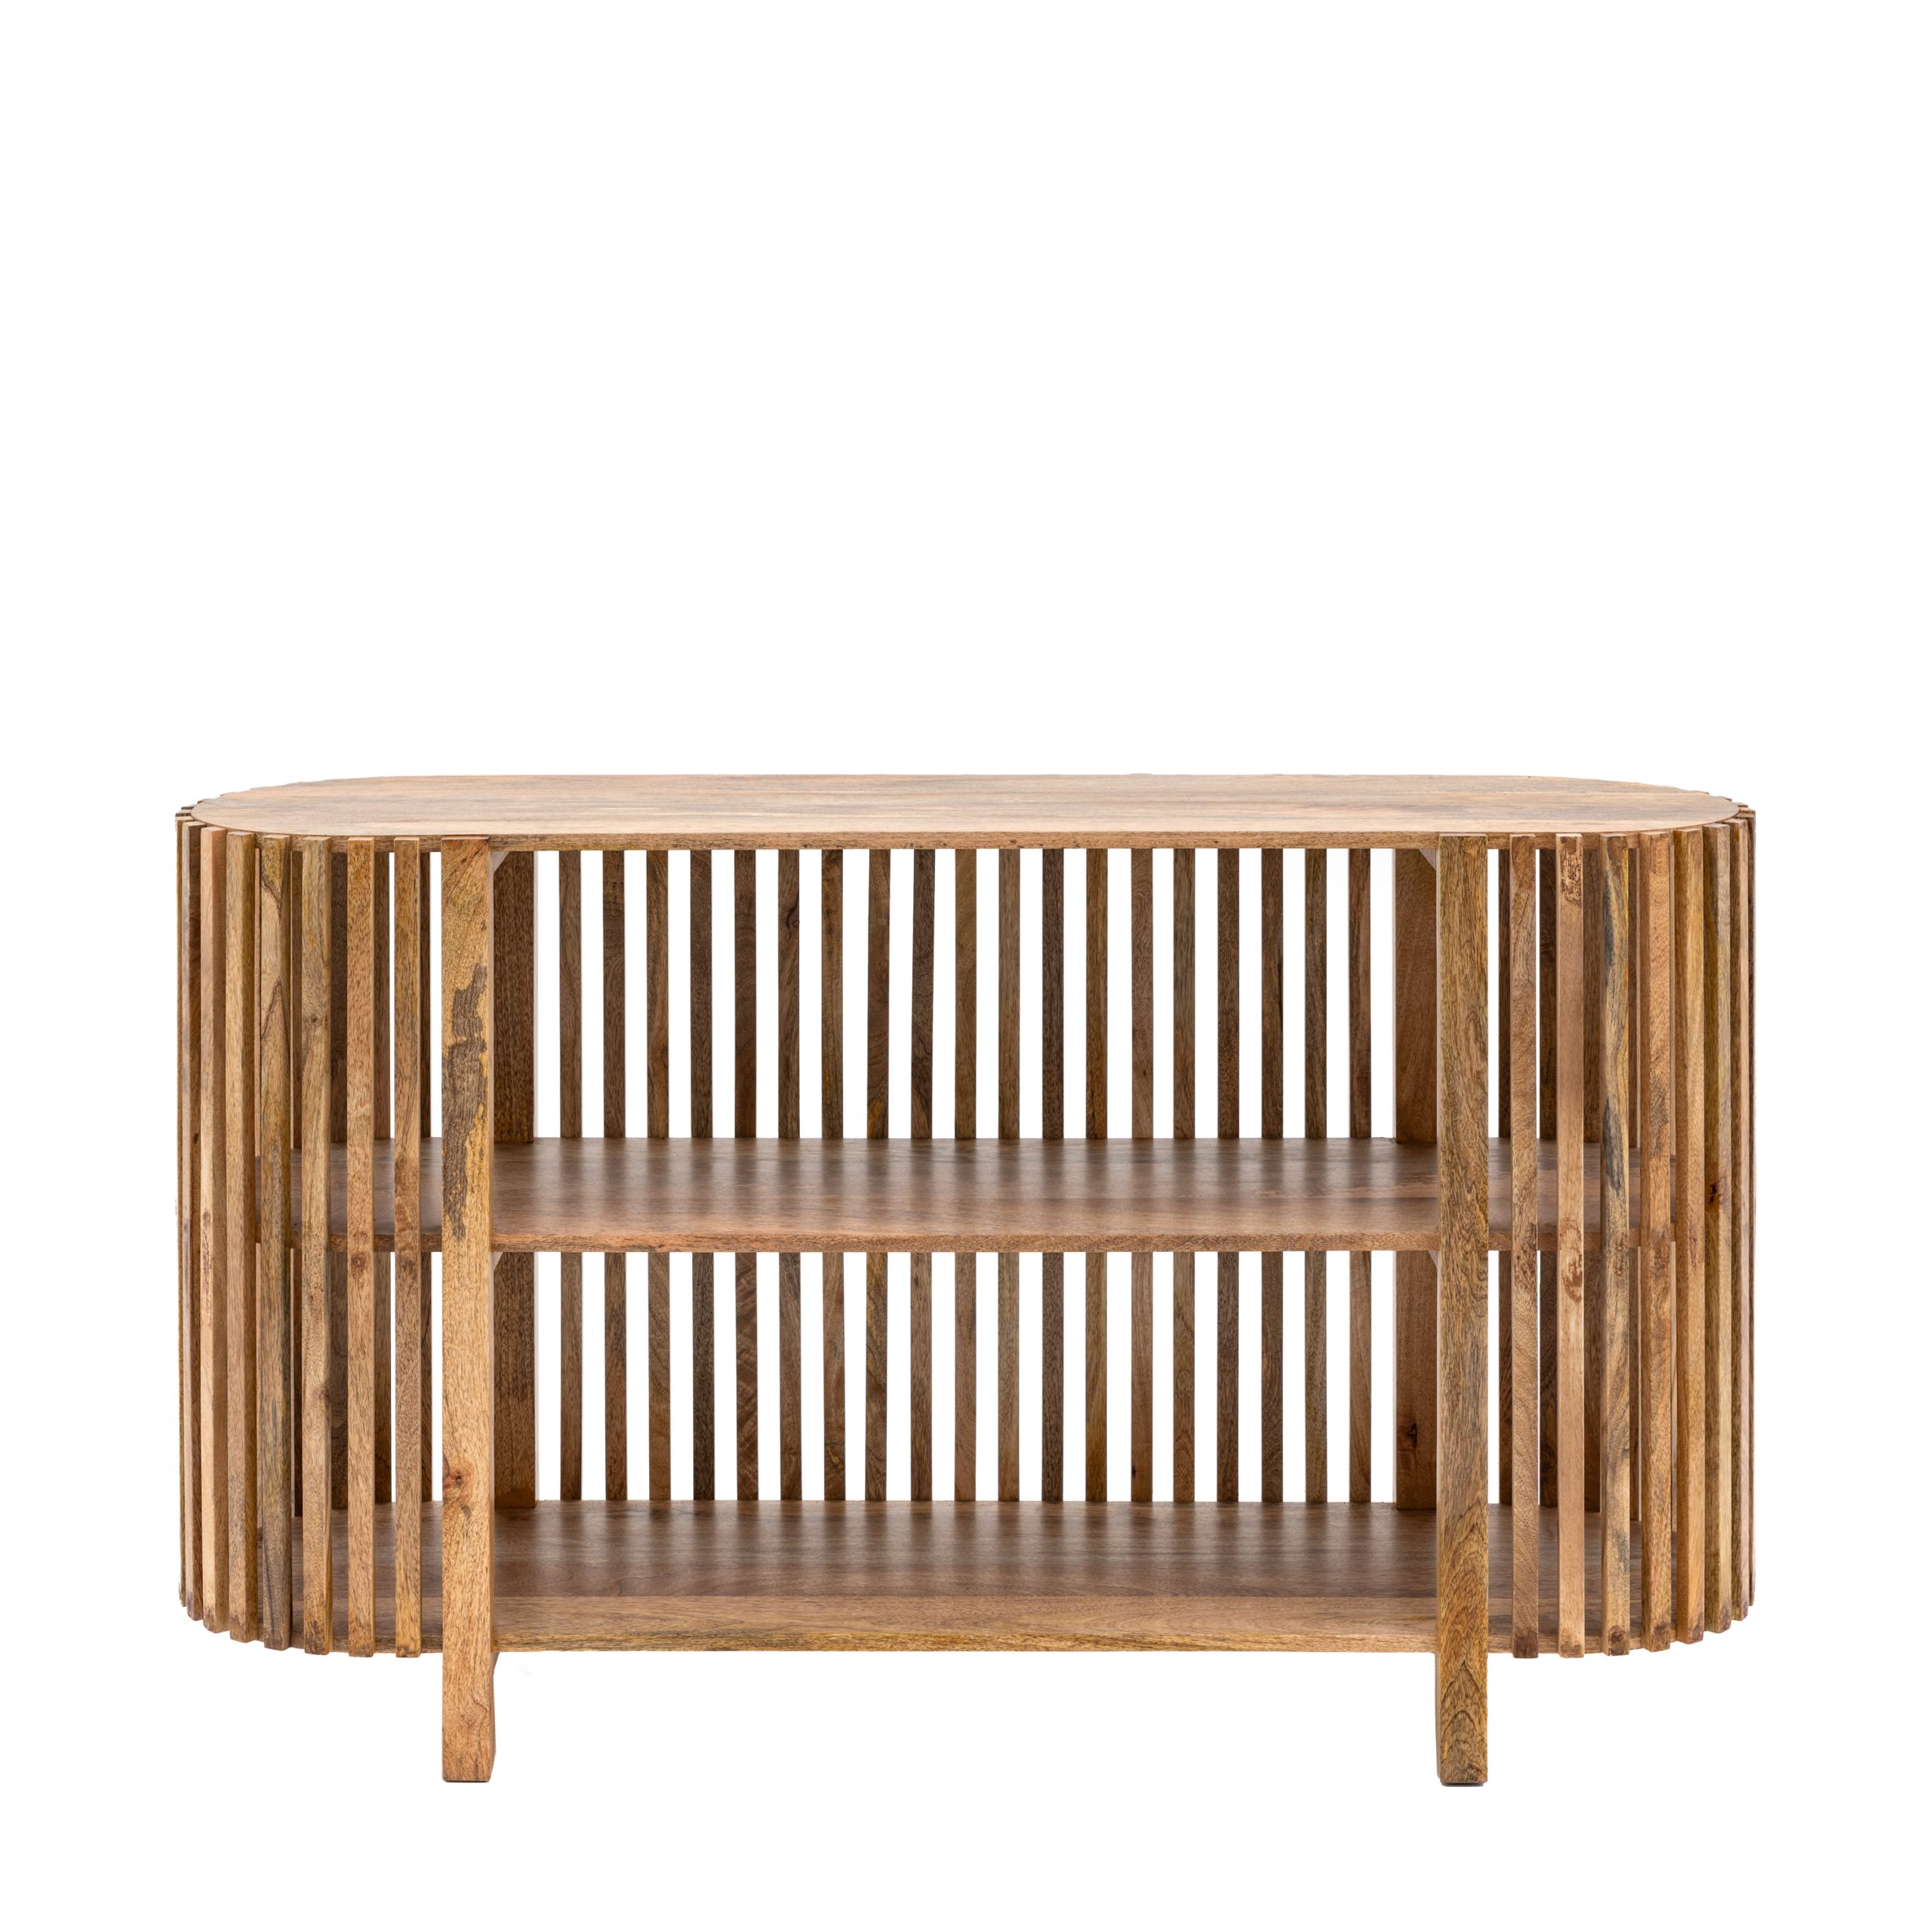 Gallery Direct Voss Slatted Console Table